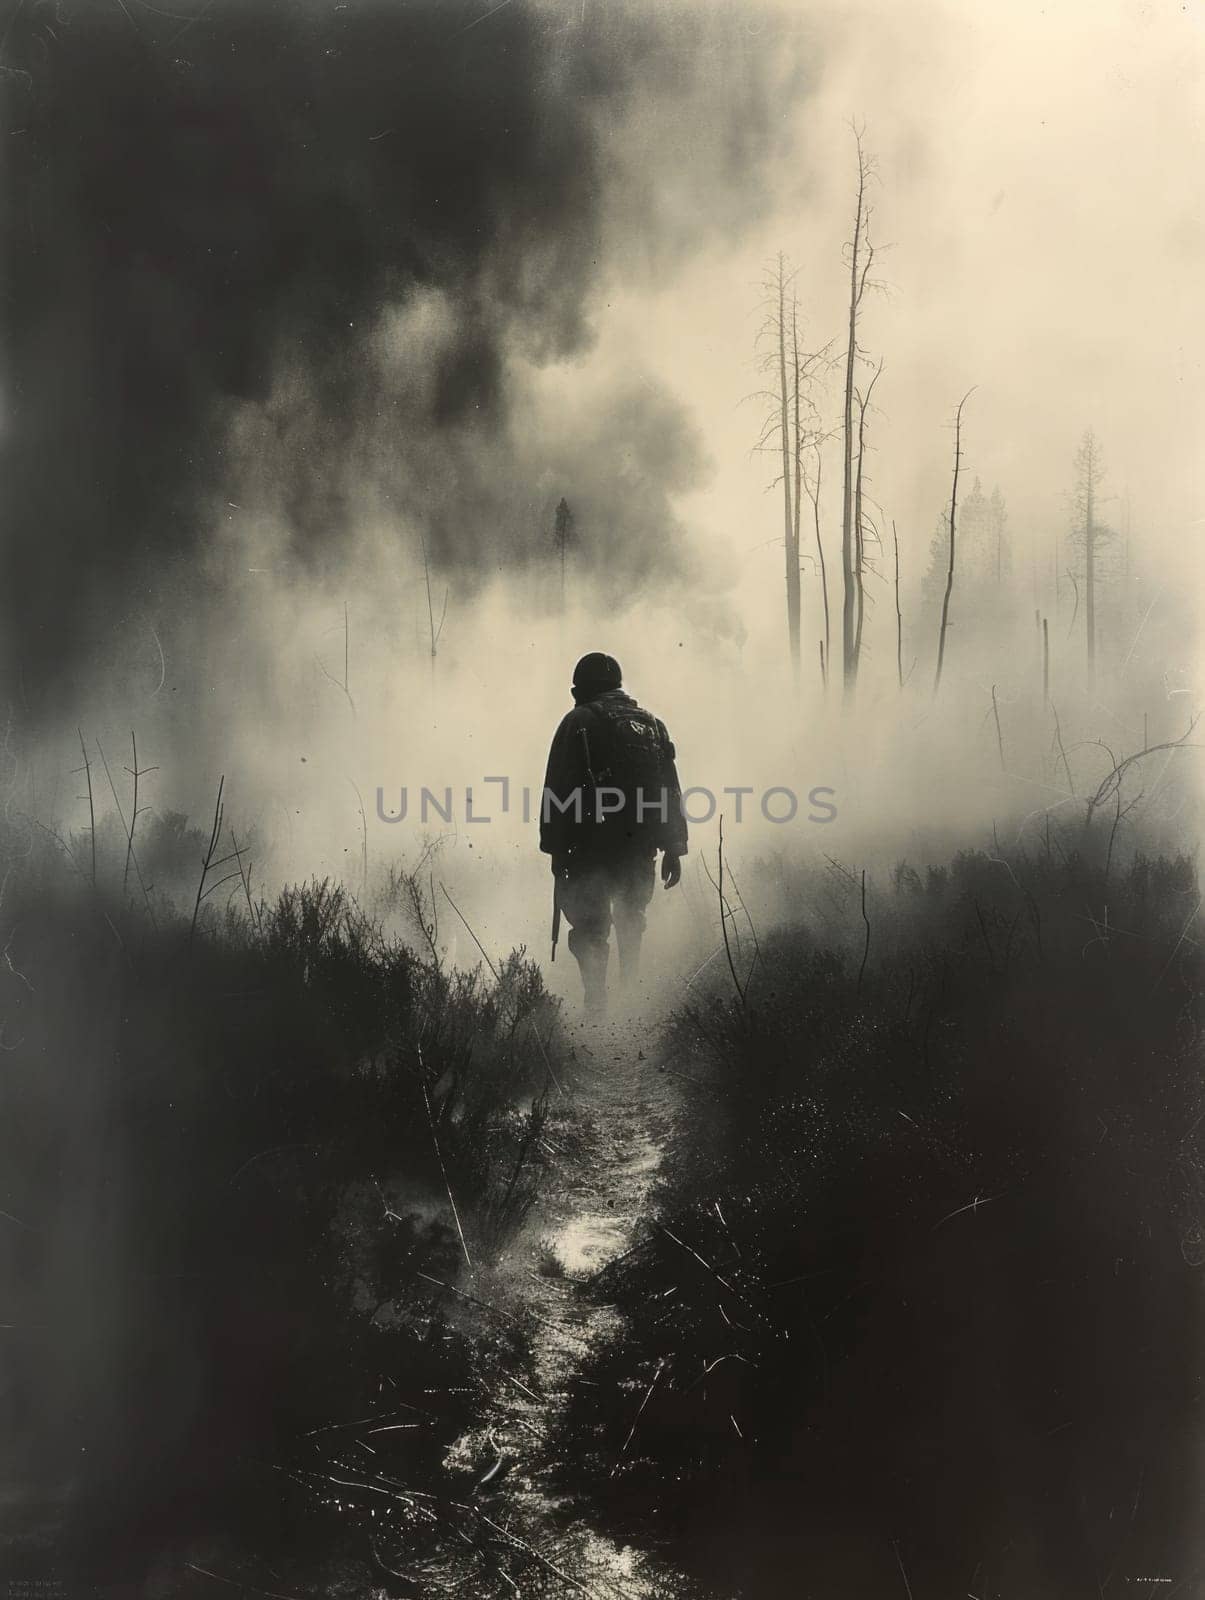 A person is seen walking through a foggy environment in this black and white photograph.